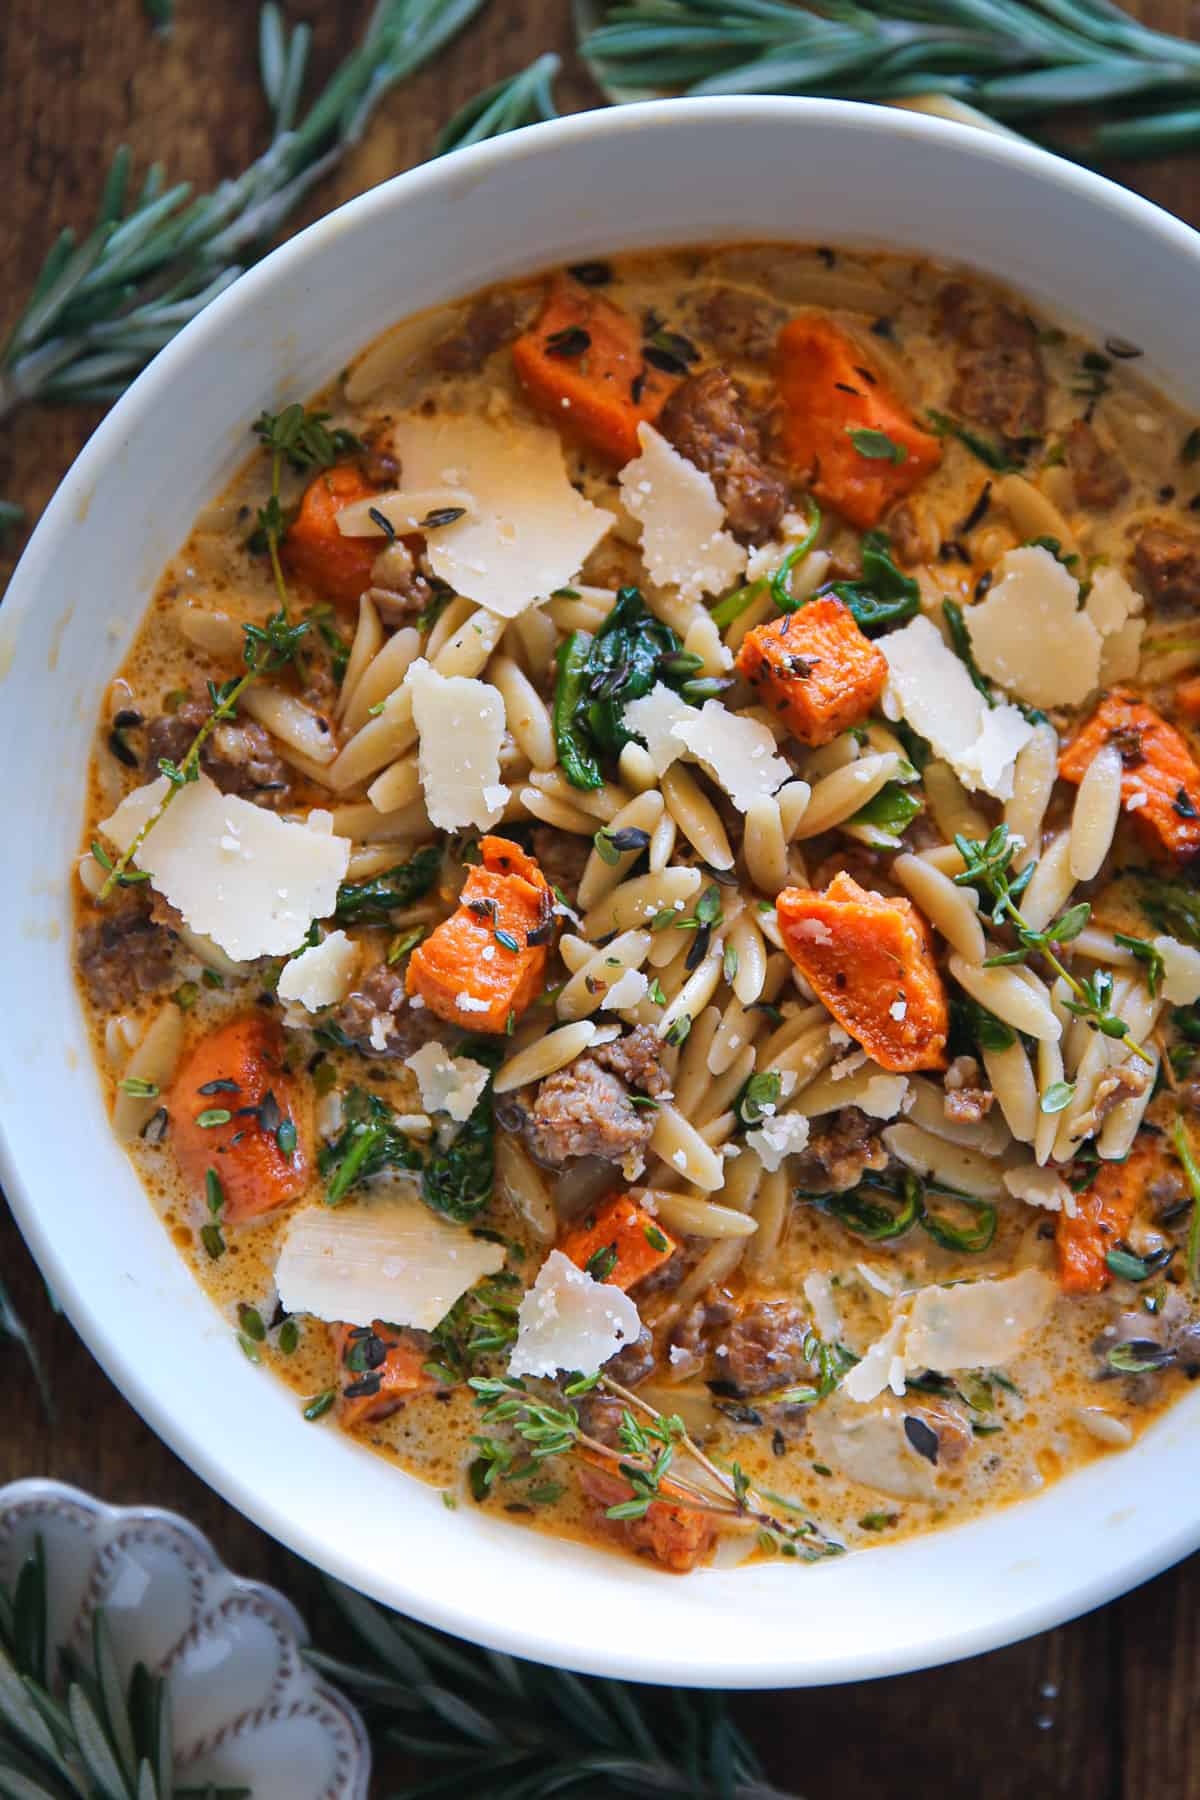 Creamy Butternut Squash and Sausage Soup with Orzo and Spinach topped with shaved Parmesan